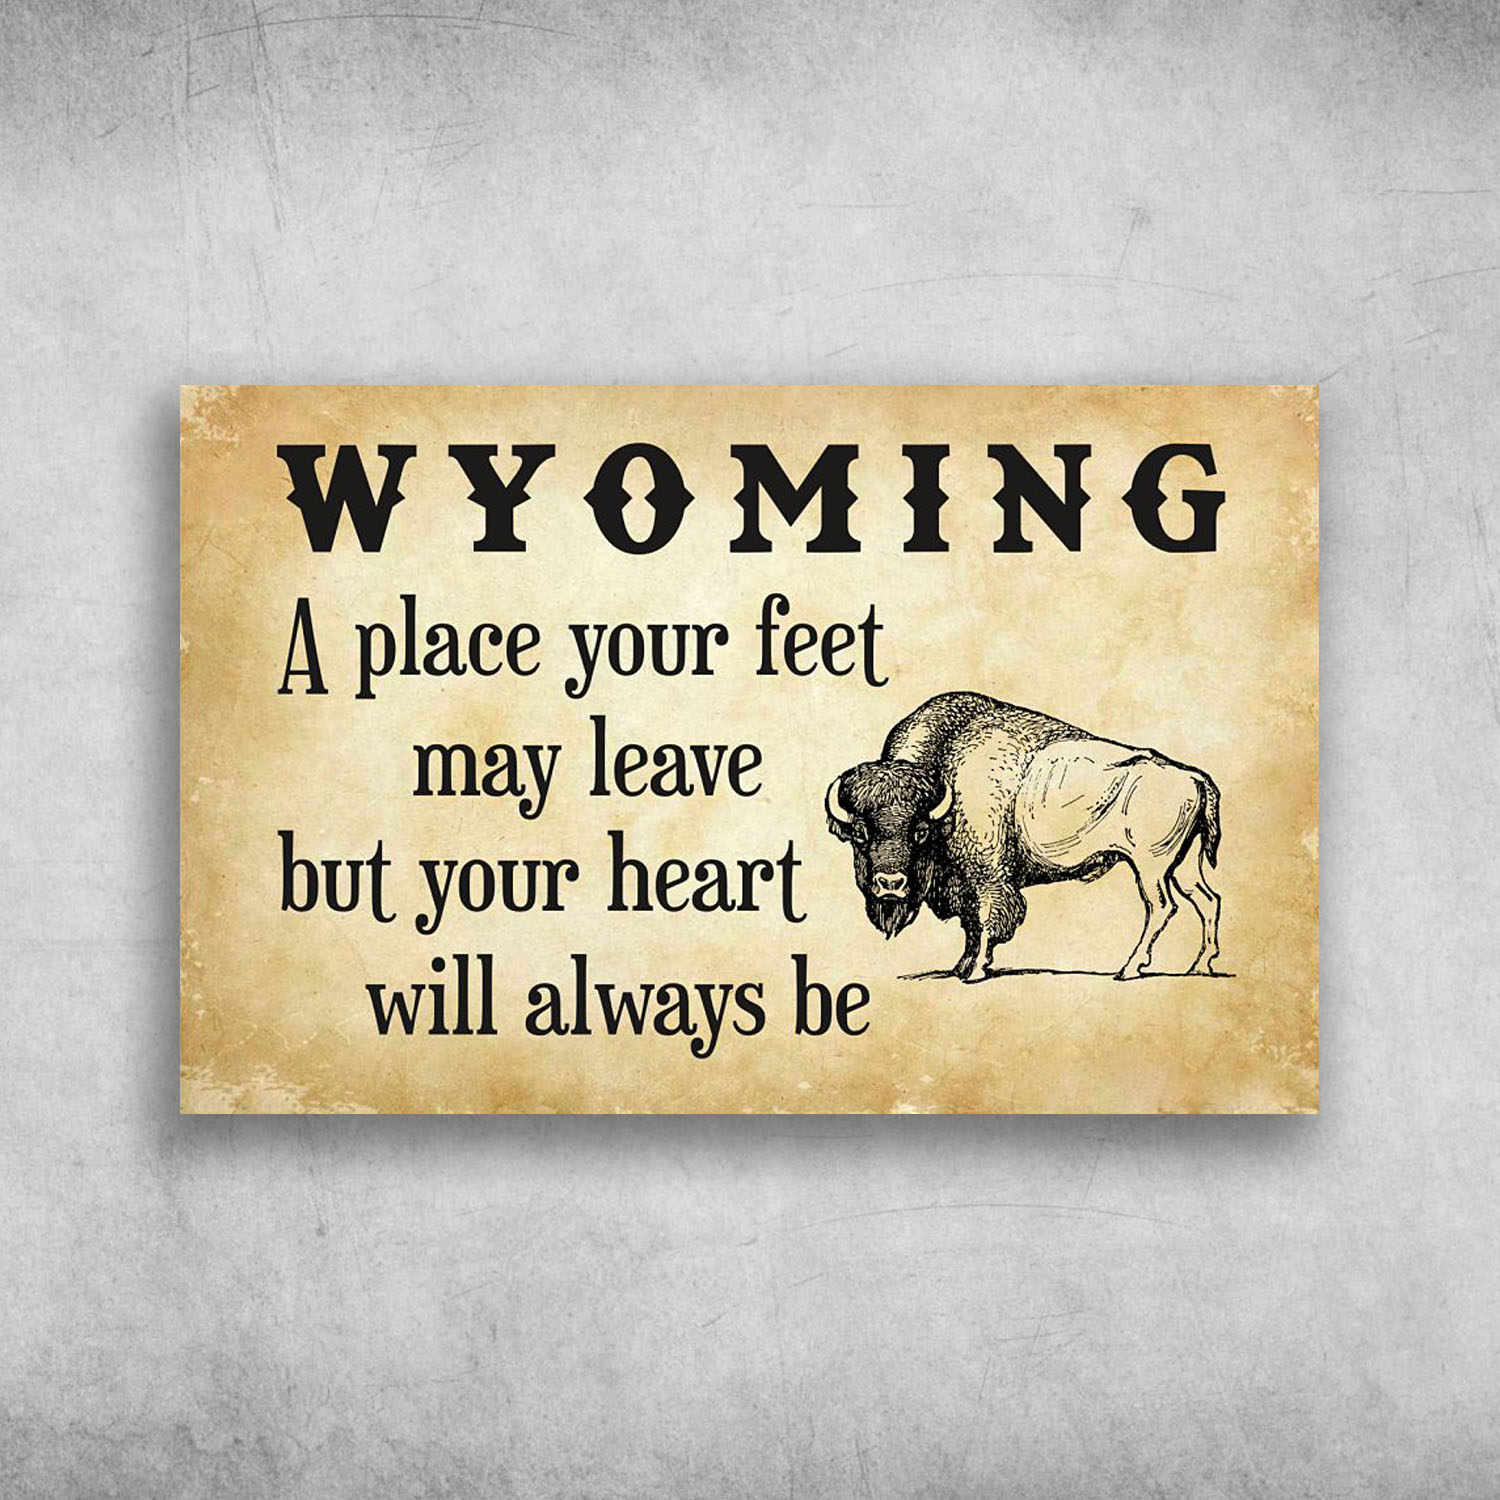 Wyoming A Place Your Feet May Leave